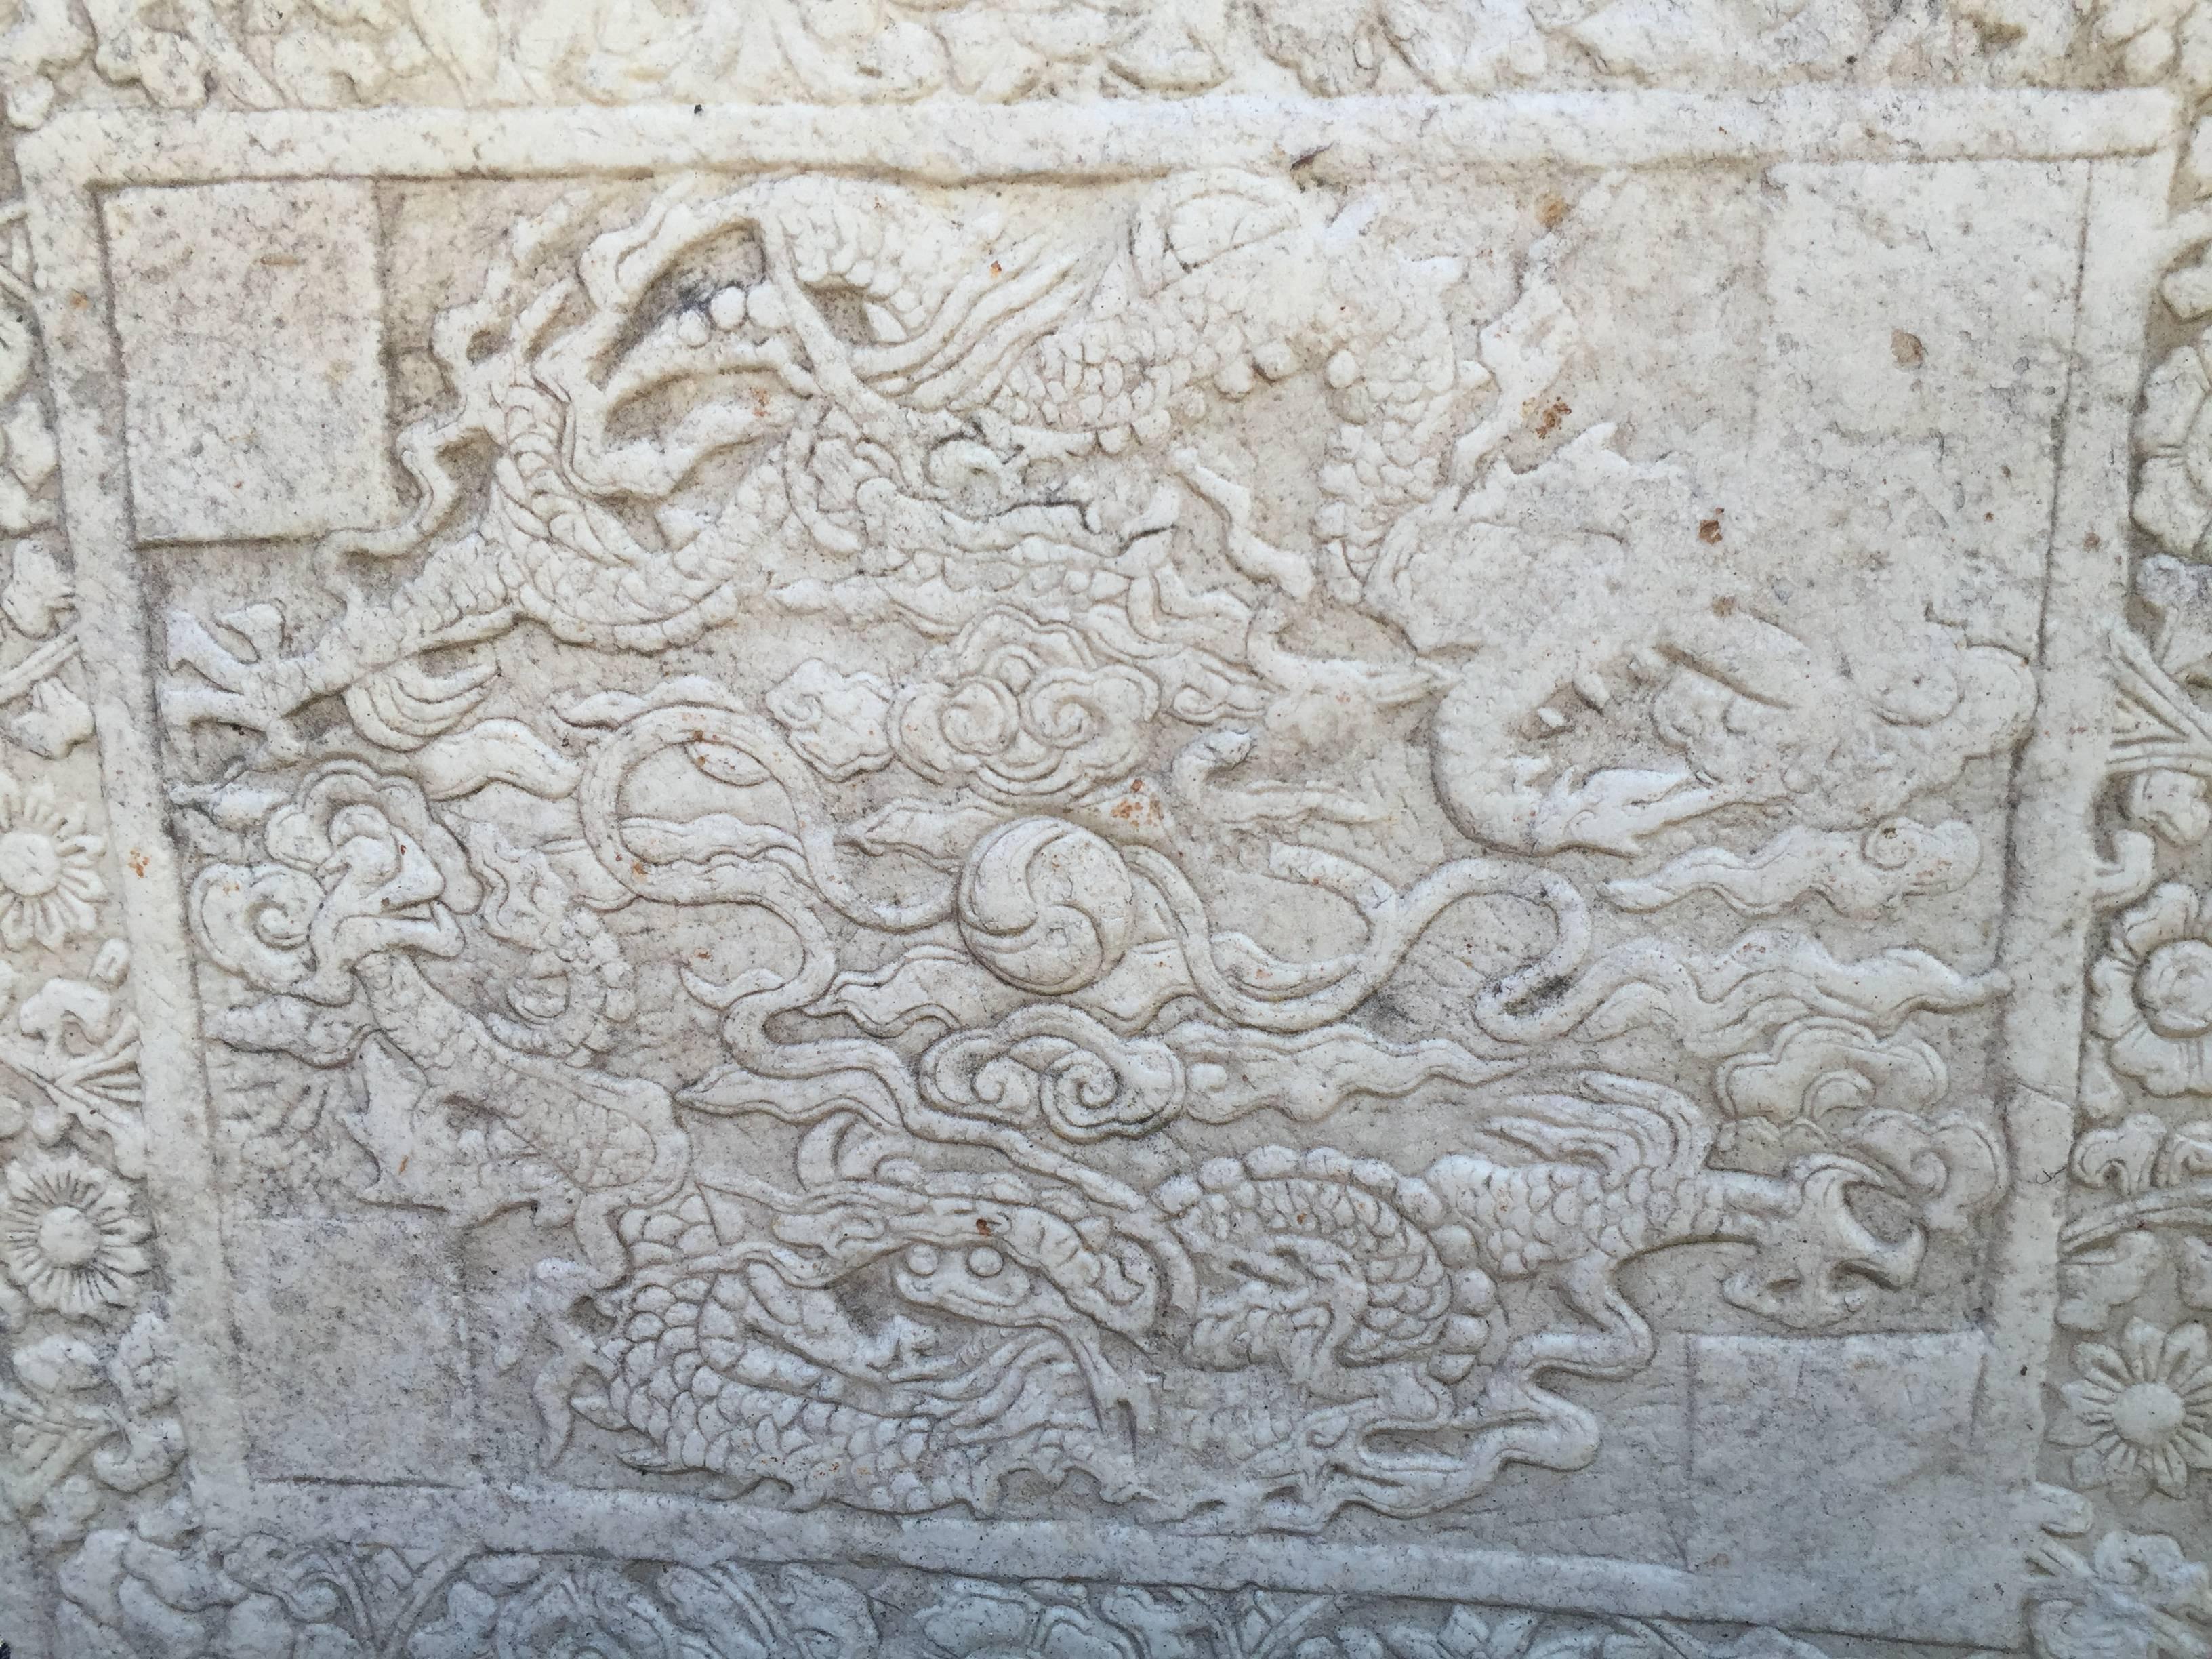 China rare old Marble and Dragons wish granting jewel thick architectural panel or stele , Qing dynasty, 19th century.

Dimensions: 26.25 inches high and 31 inches wide and 4.5 inches thick, 

Provenance: Acquired with a pair of finely carved marble